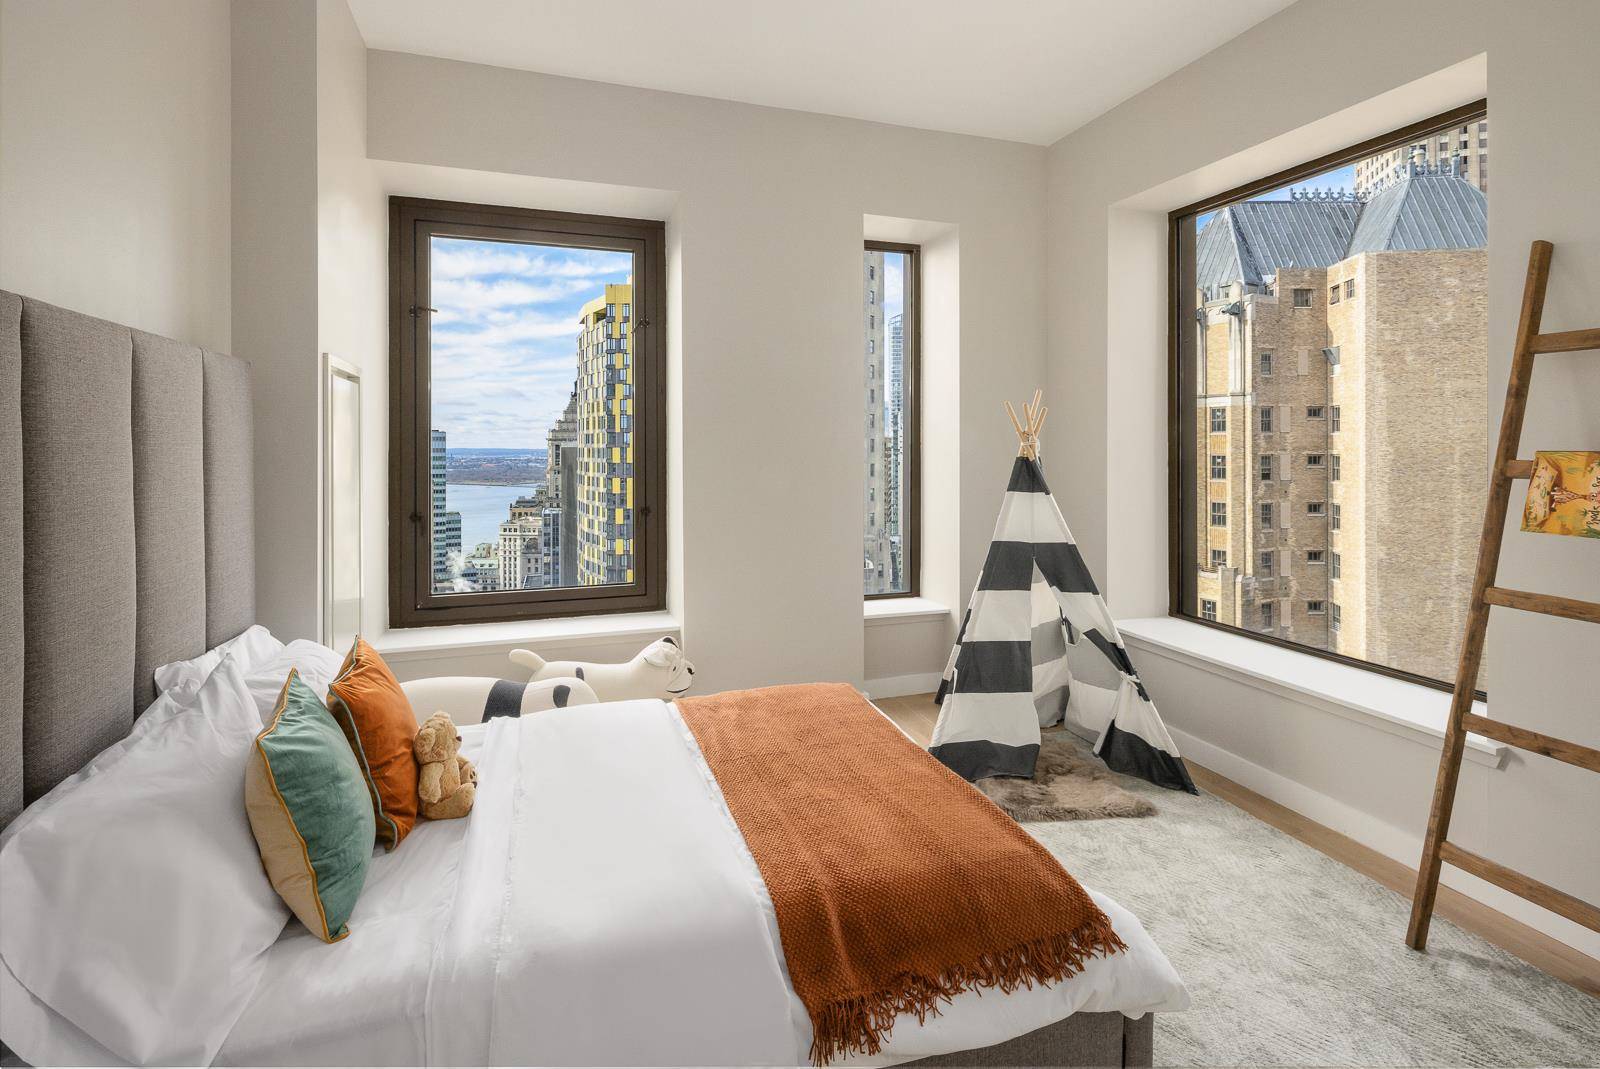 Platinum Properties is proud to present residence 36F at 75 Wall Street.